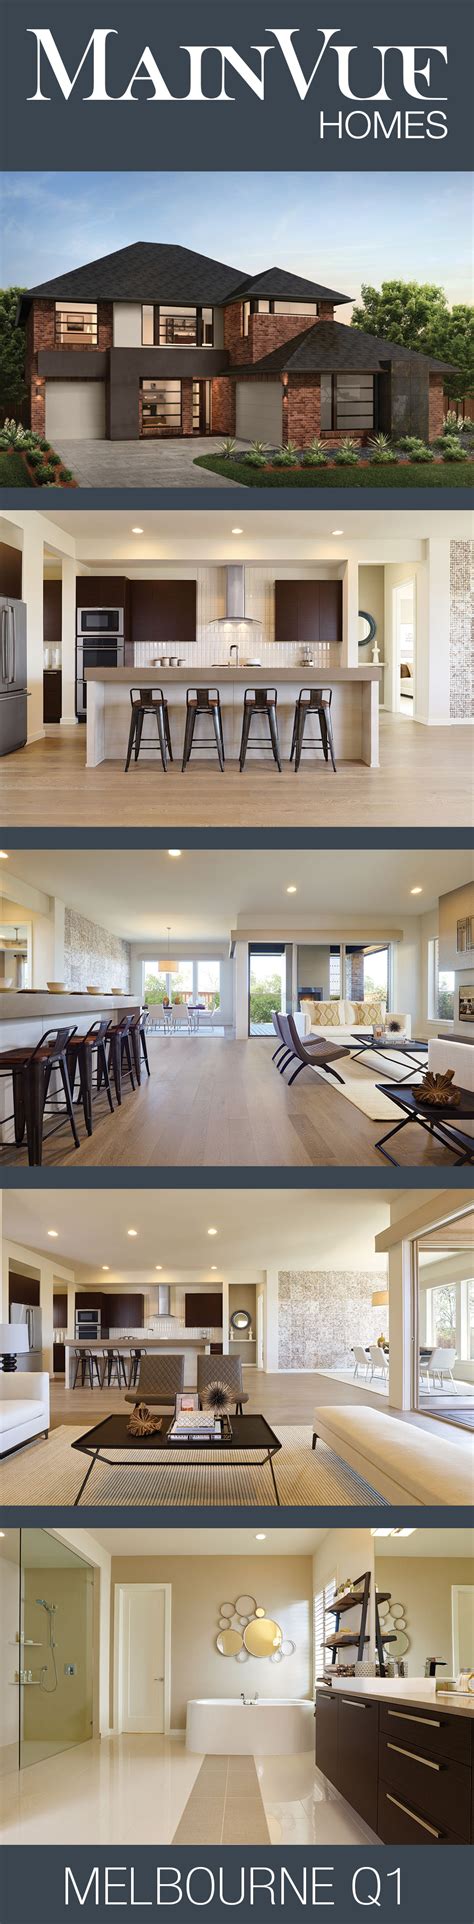 6 styles for lifestyle images. MainVue Homes | Melbourne Q1 | Dallas, Texas | New home ...